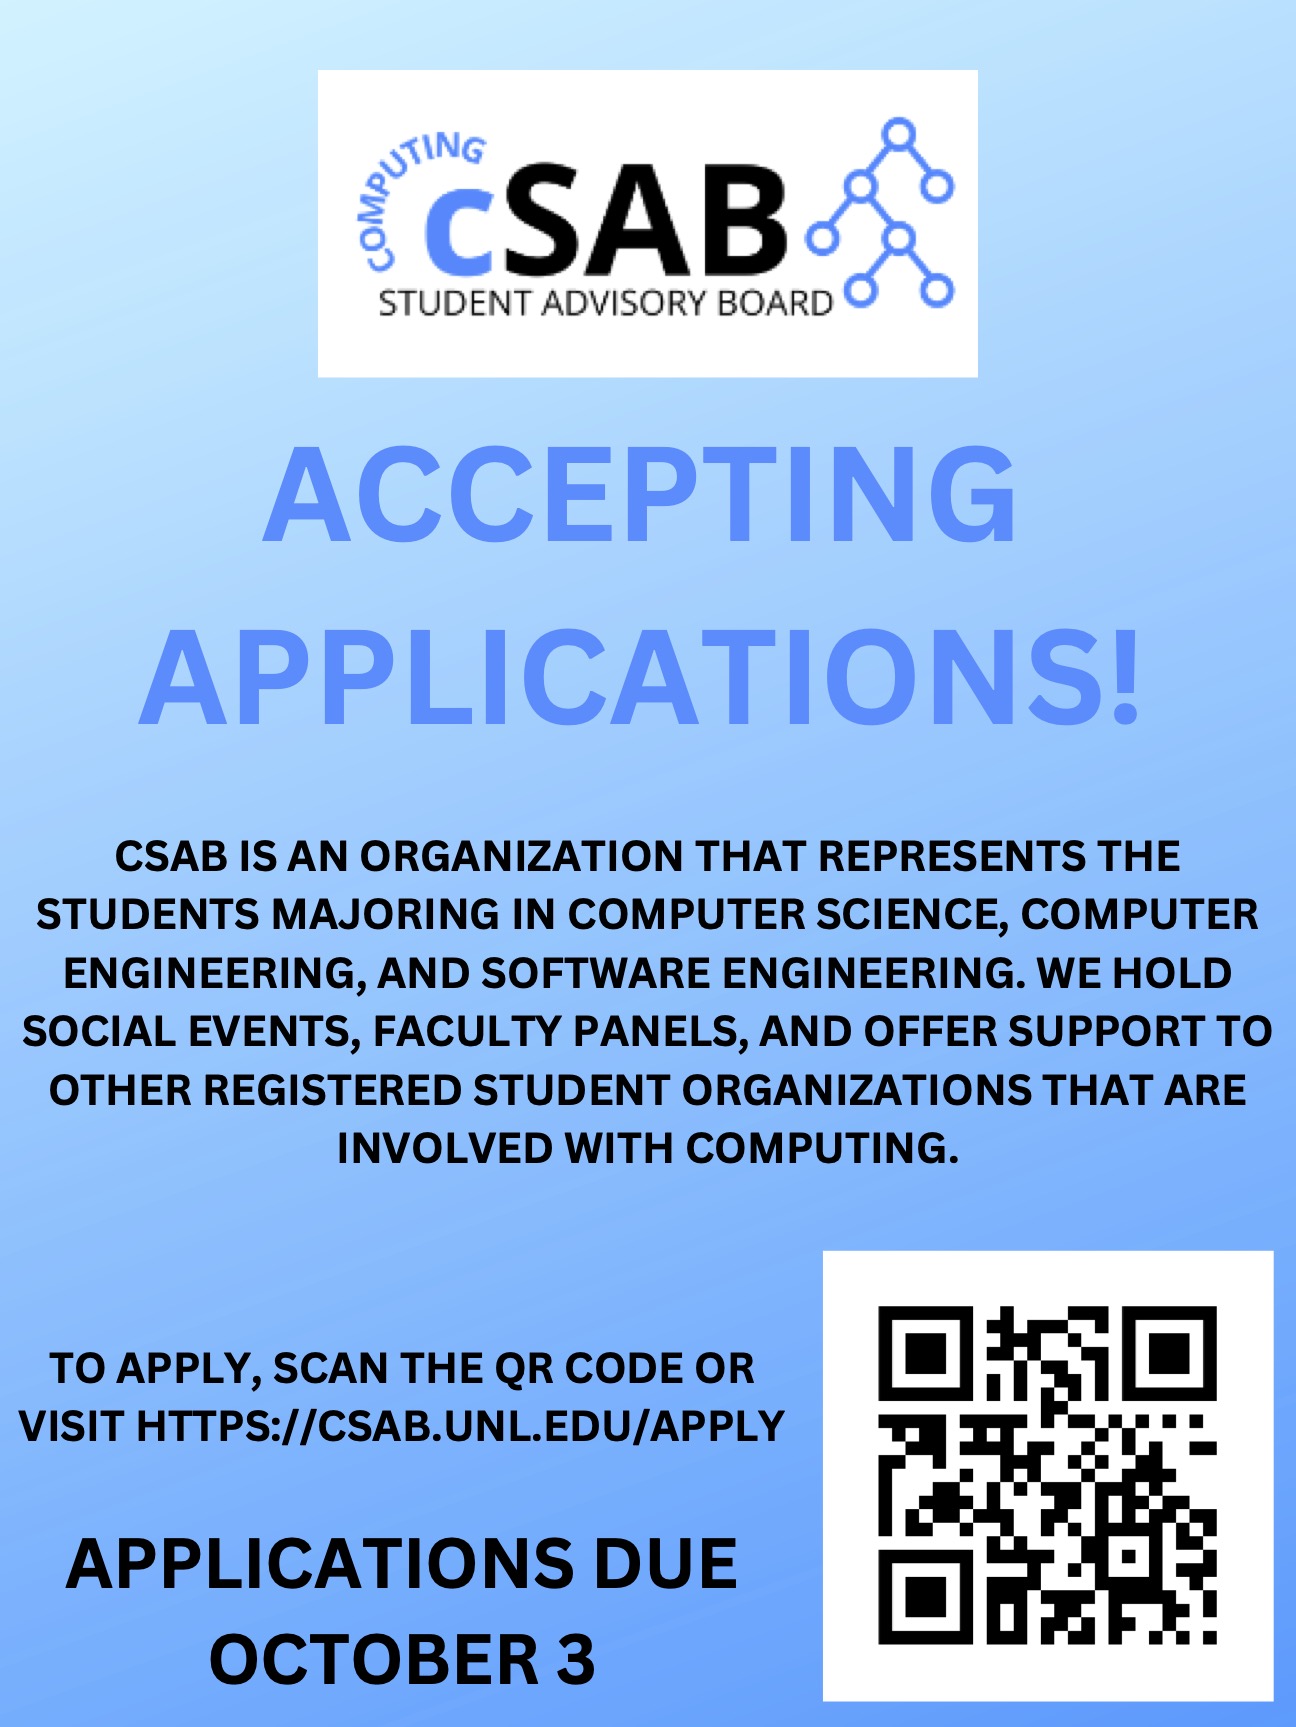 cSAB is now accepting applications.